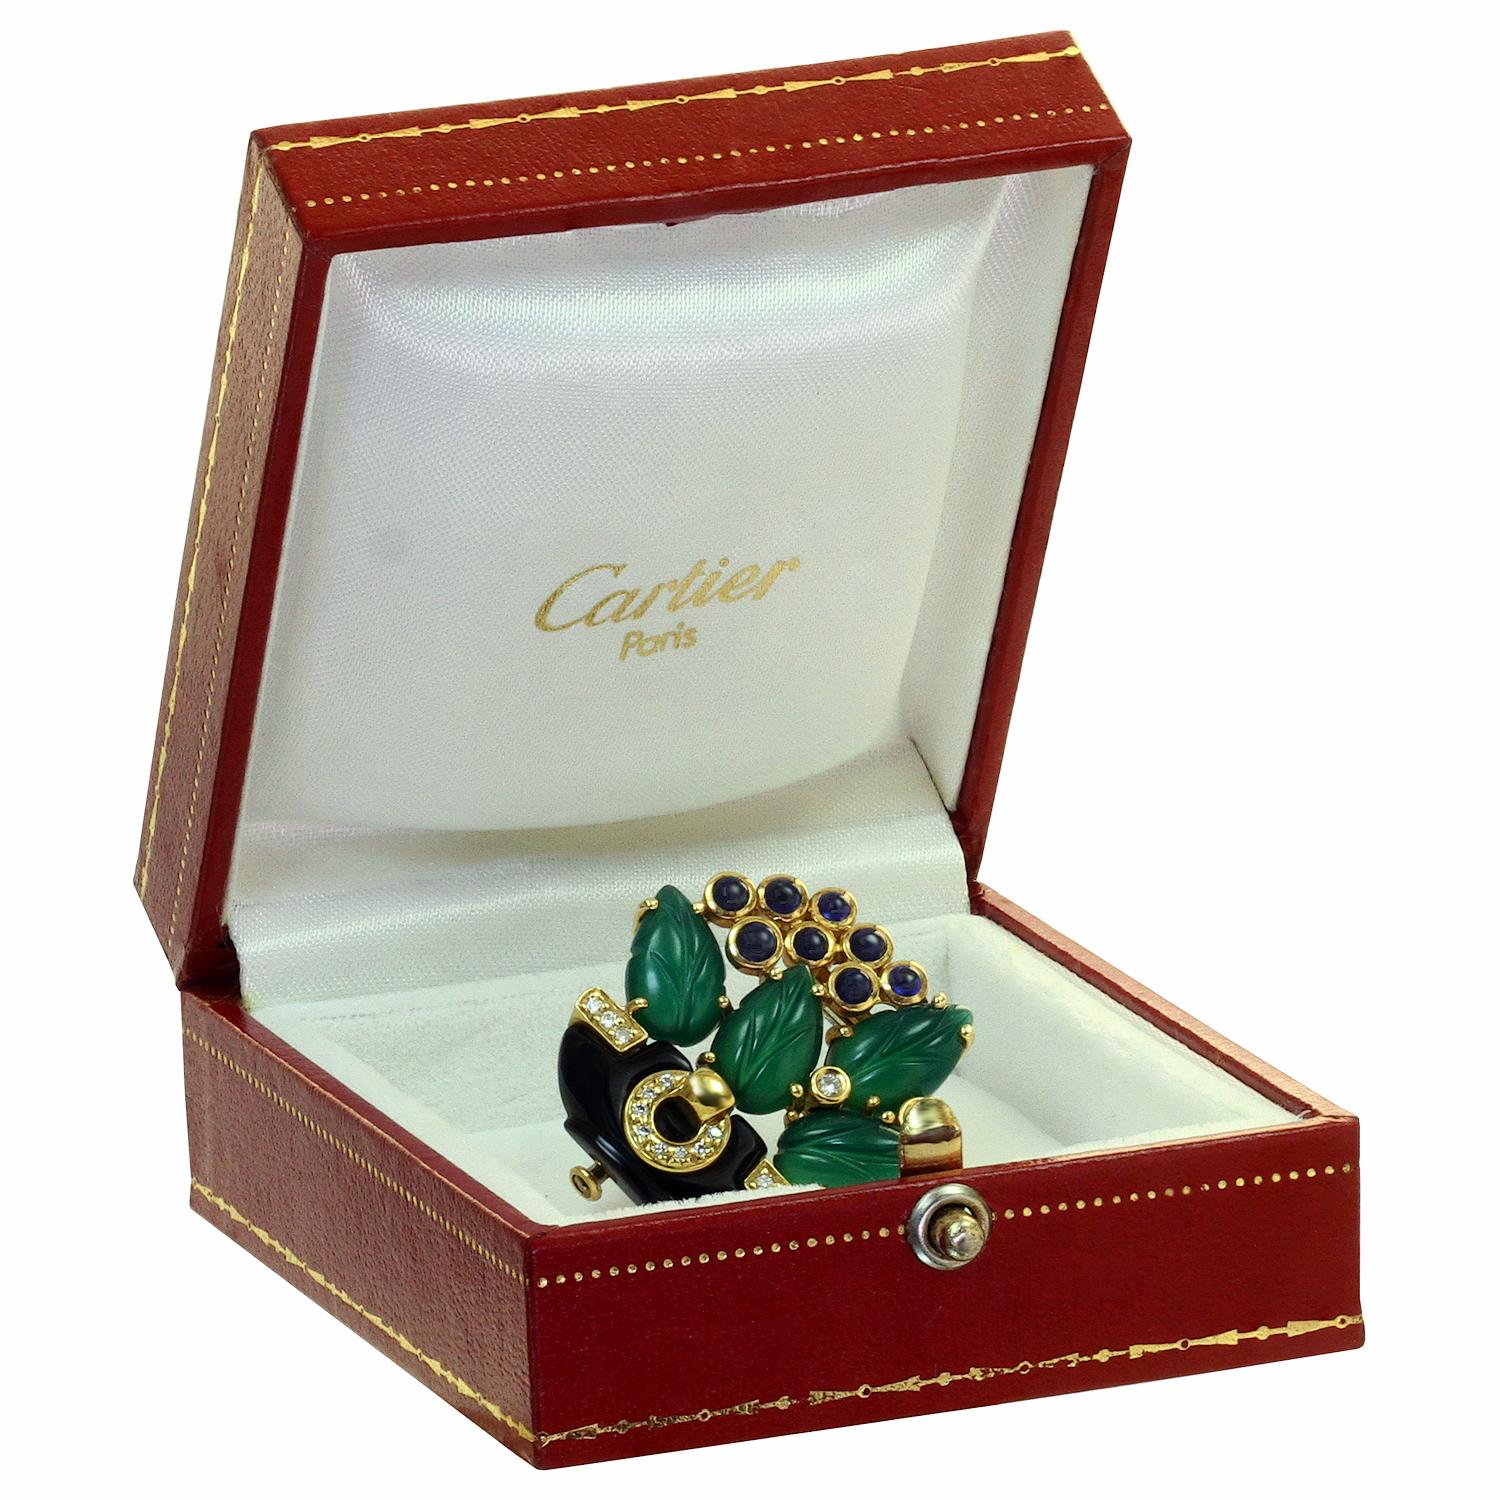 This exquisite brooch from Cartier's celebratede Les Indes Galantes collection features a floral design composed of a black onyx bowl accented with full-cut paved diamonds, green curved agate leaves, round cabochon blue sapphires and brillant-cut